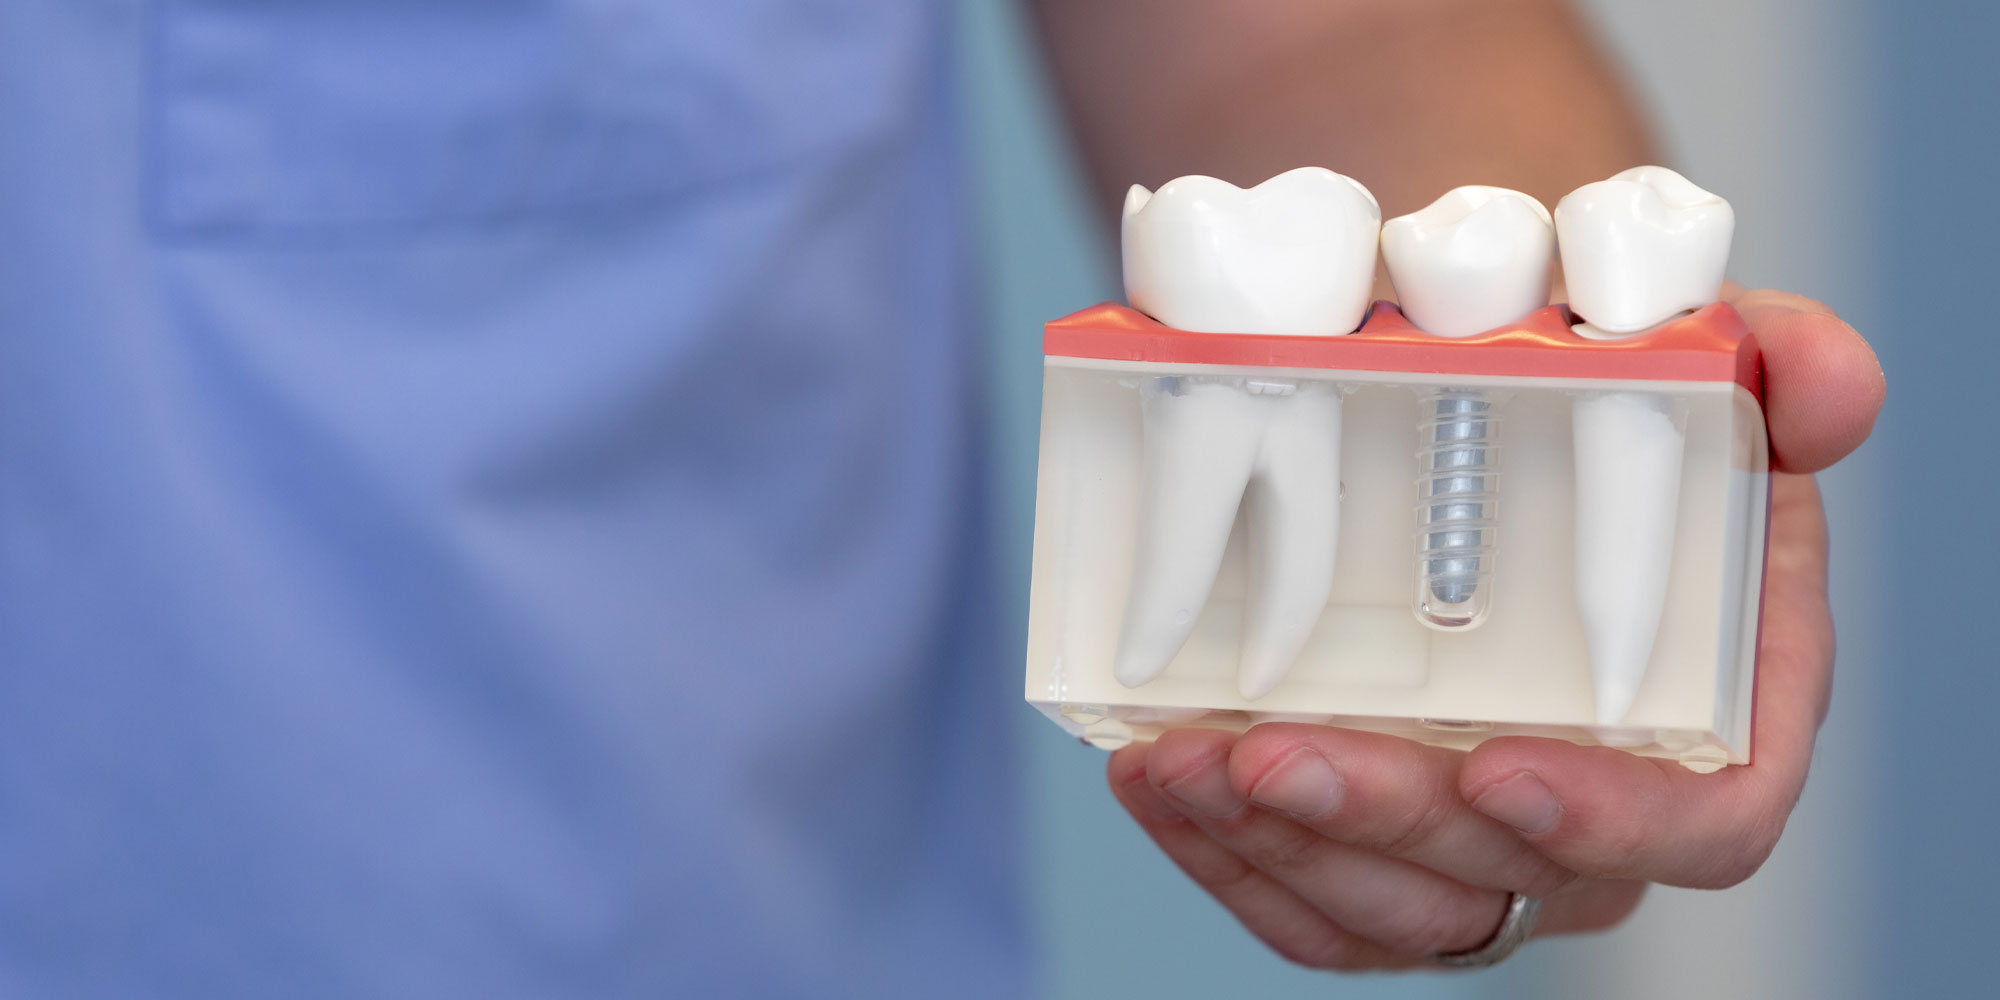 Dental Implant Model Being Held By A Doctor